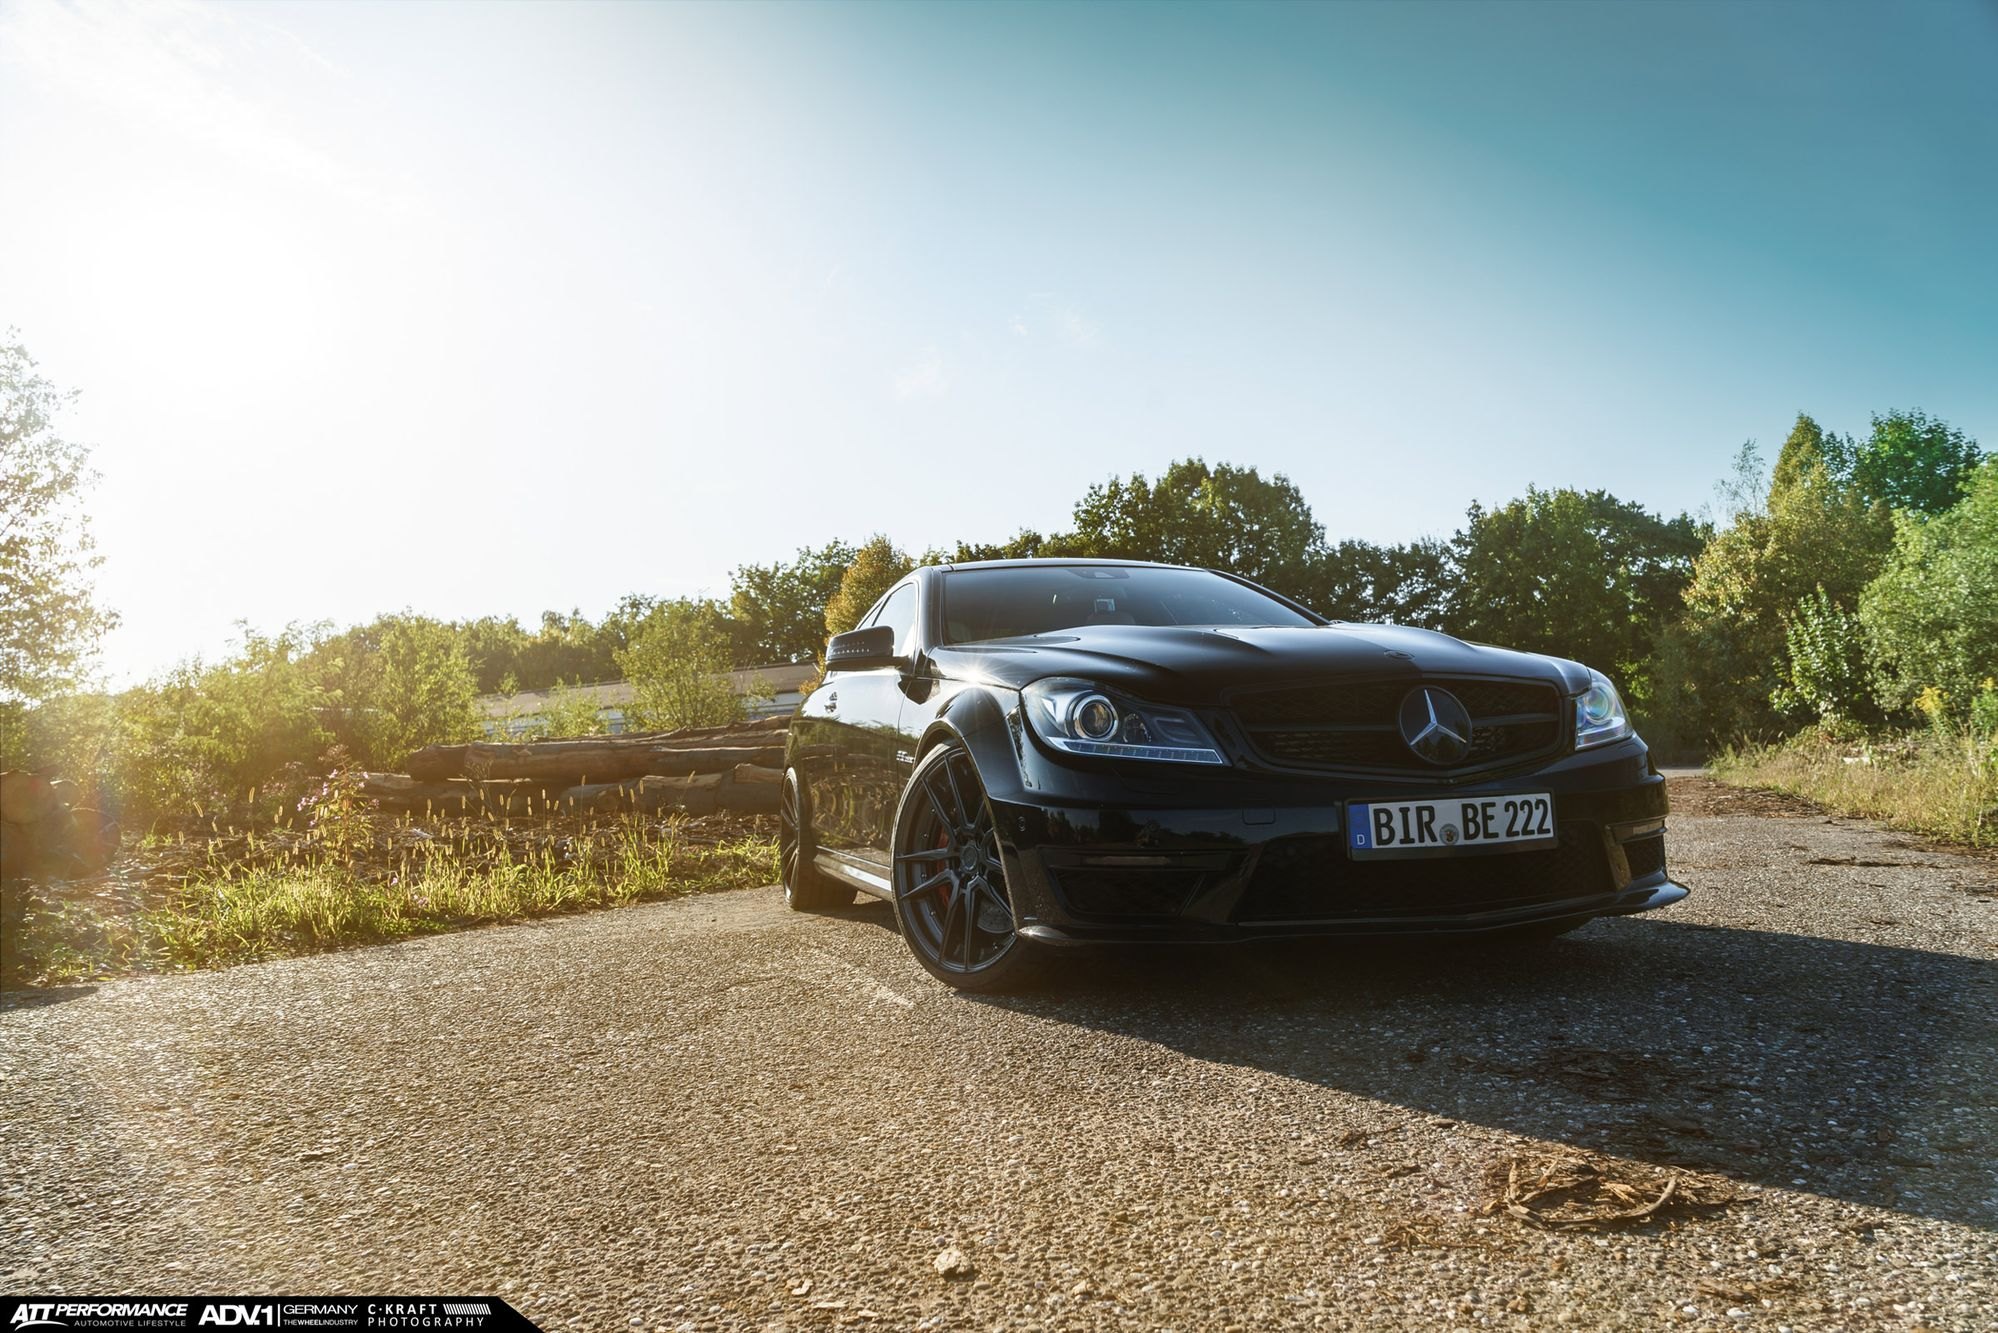 Black Custom painted Grille On Mercedes C63 - Photo by ADV.1